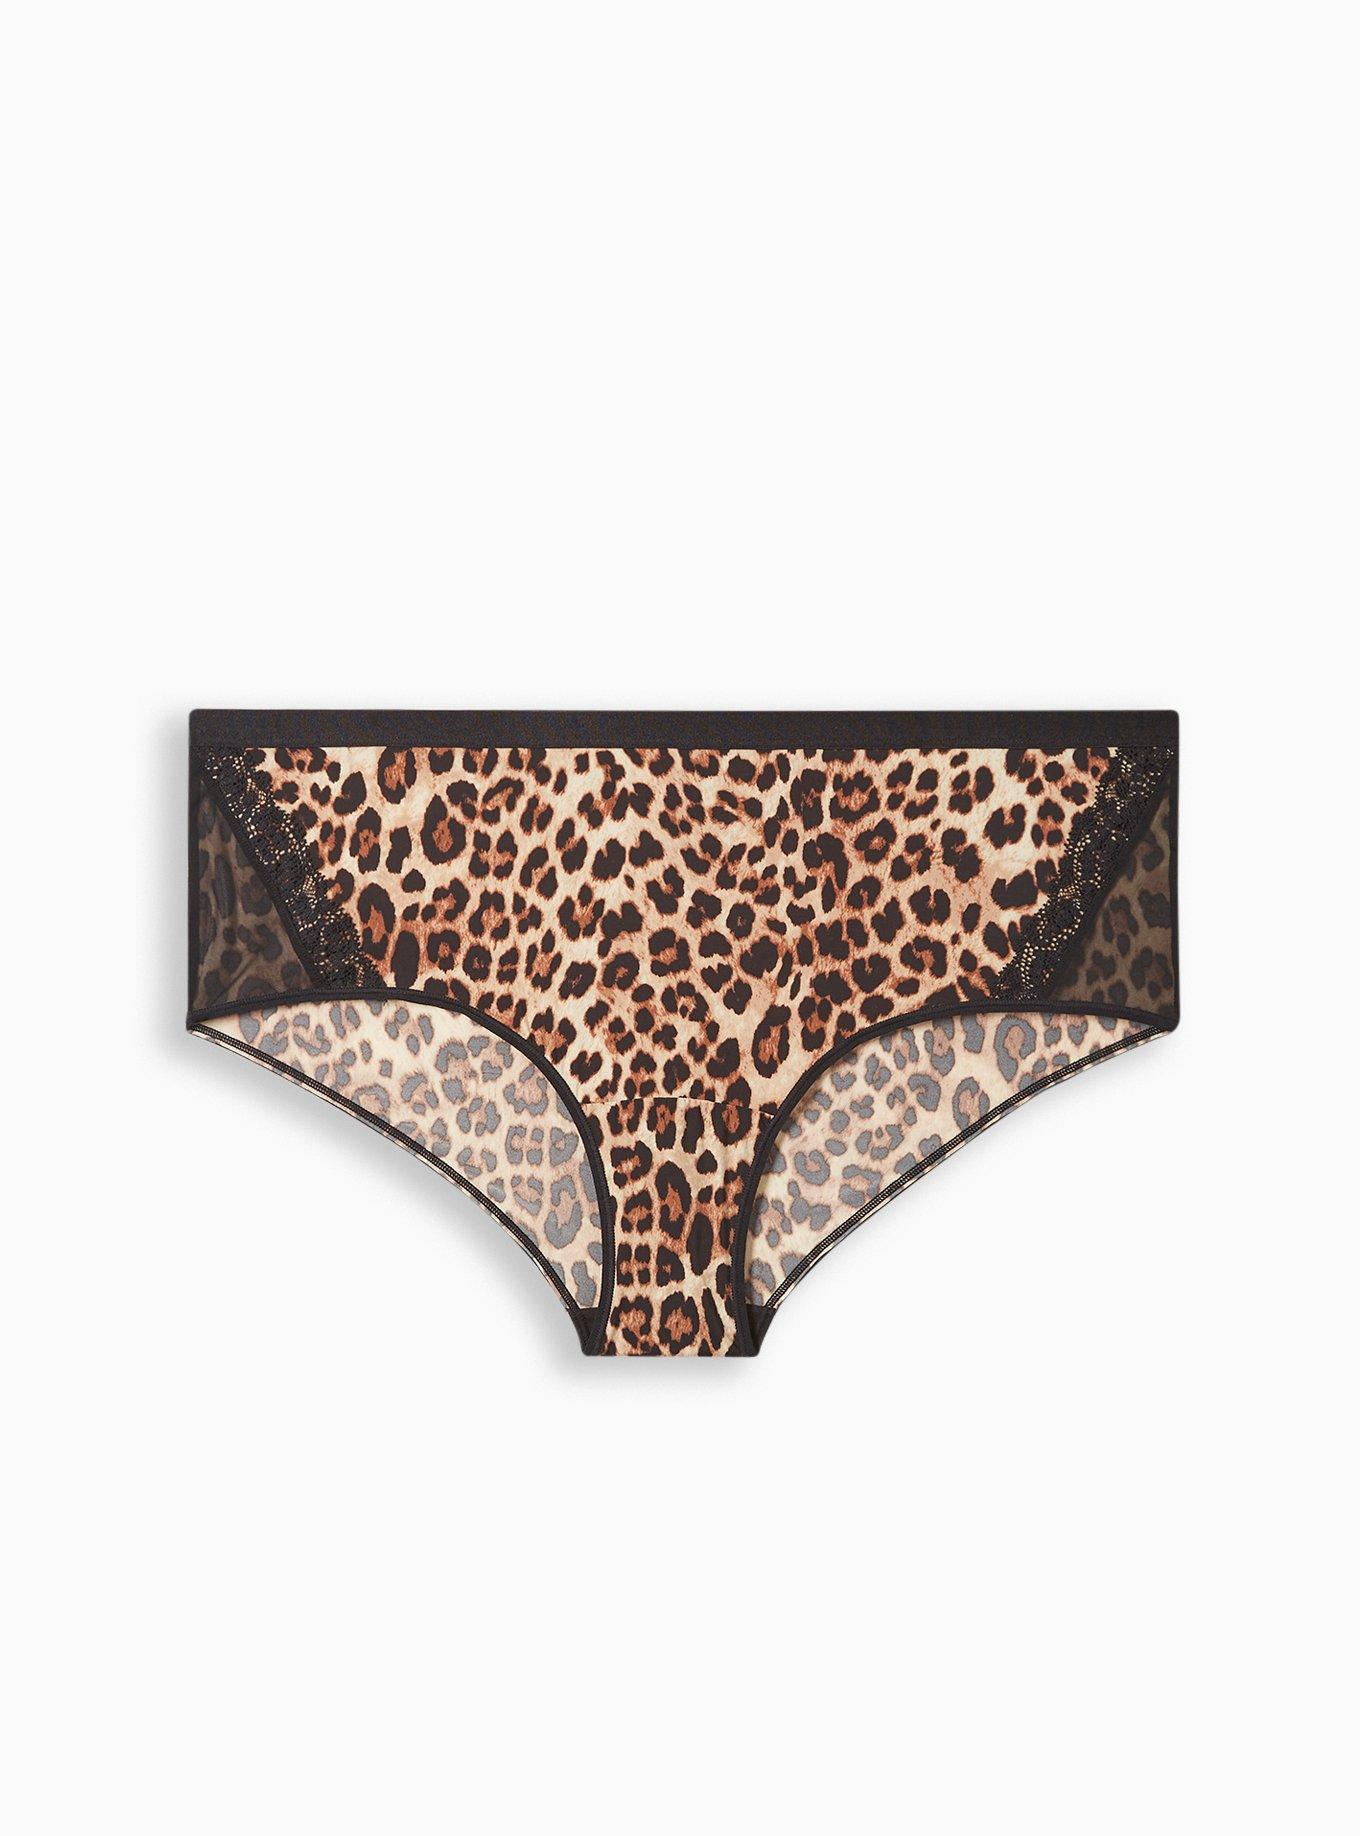 Buy Women's Sexy Briefs Camouflage Printed Casual Panties Mid